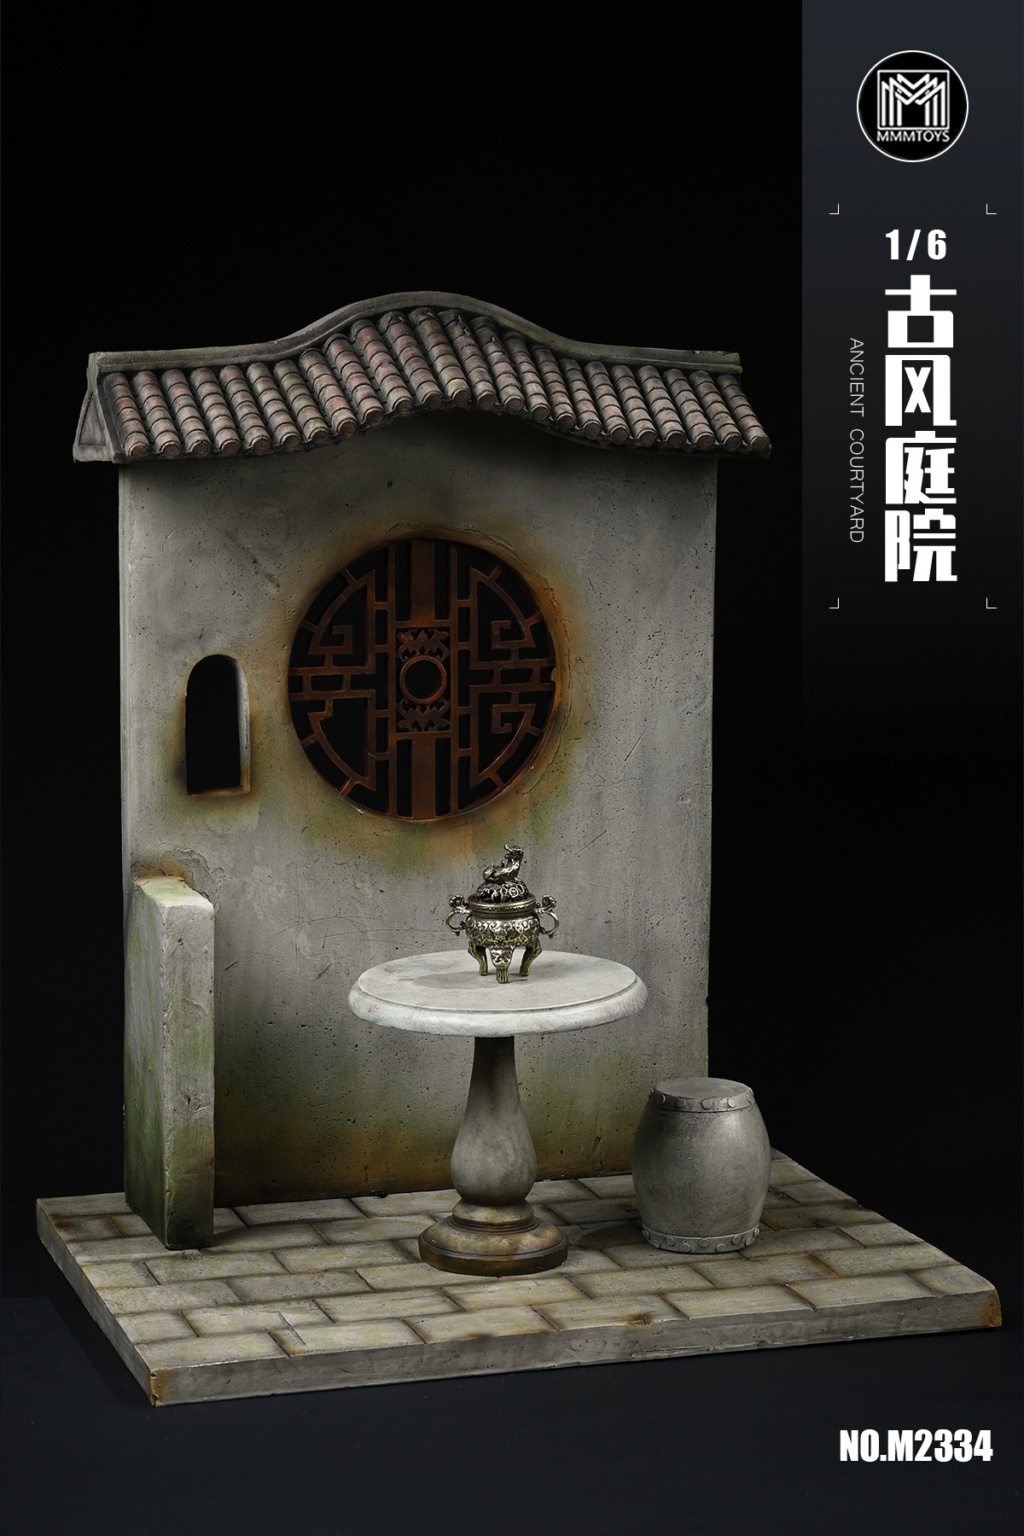 Base - NEW PRODUCT: MMMTOYS: 1/6 Ancient courtyard M2334 14152016